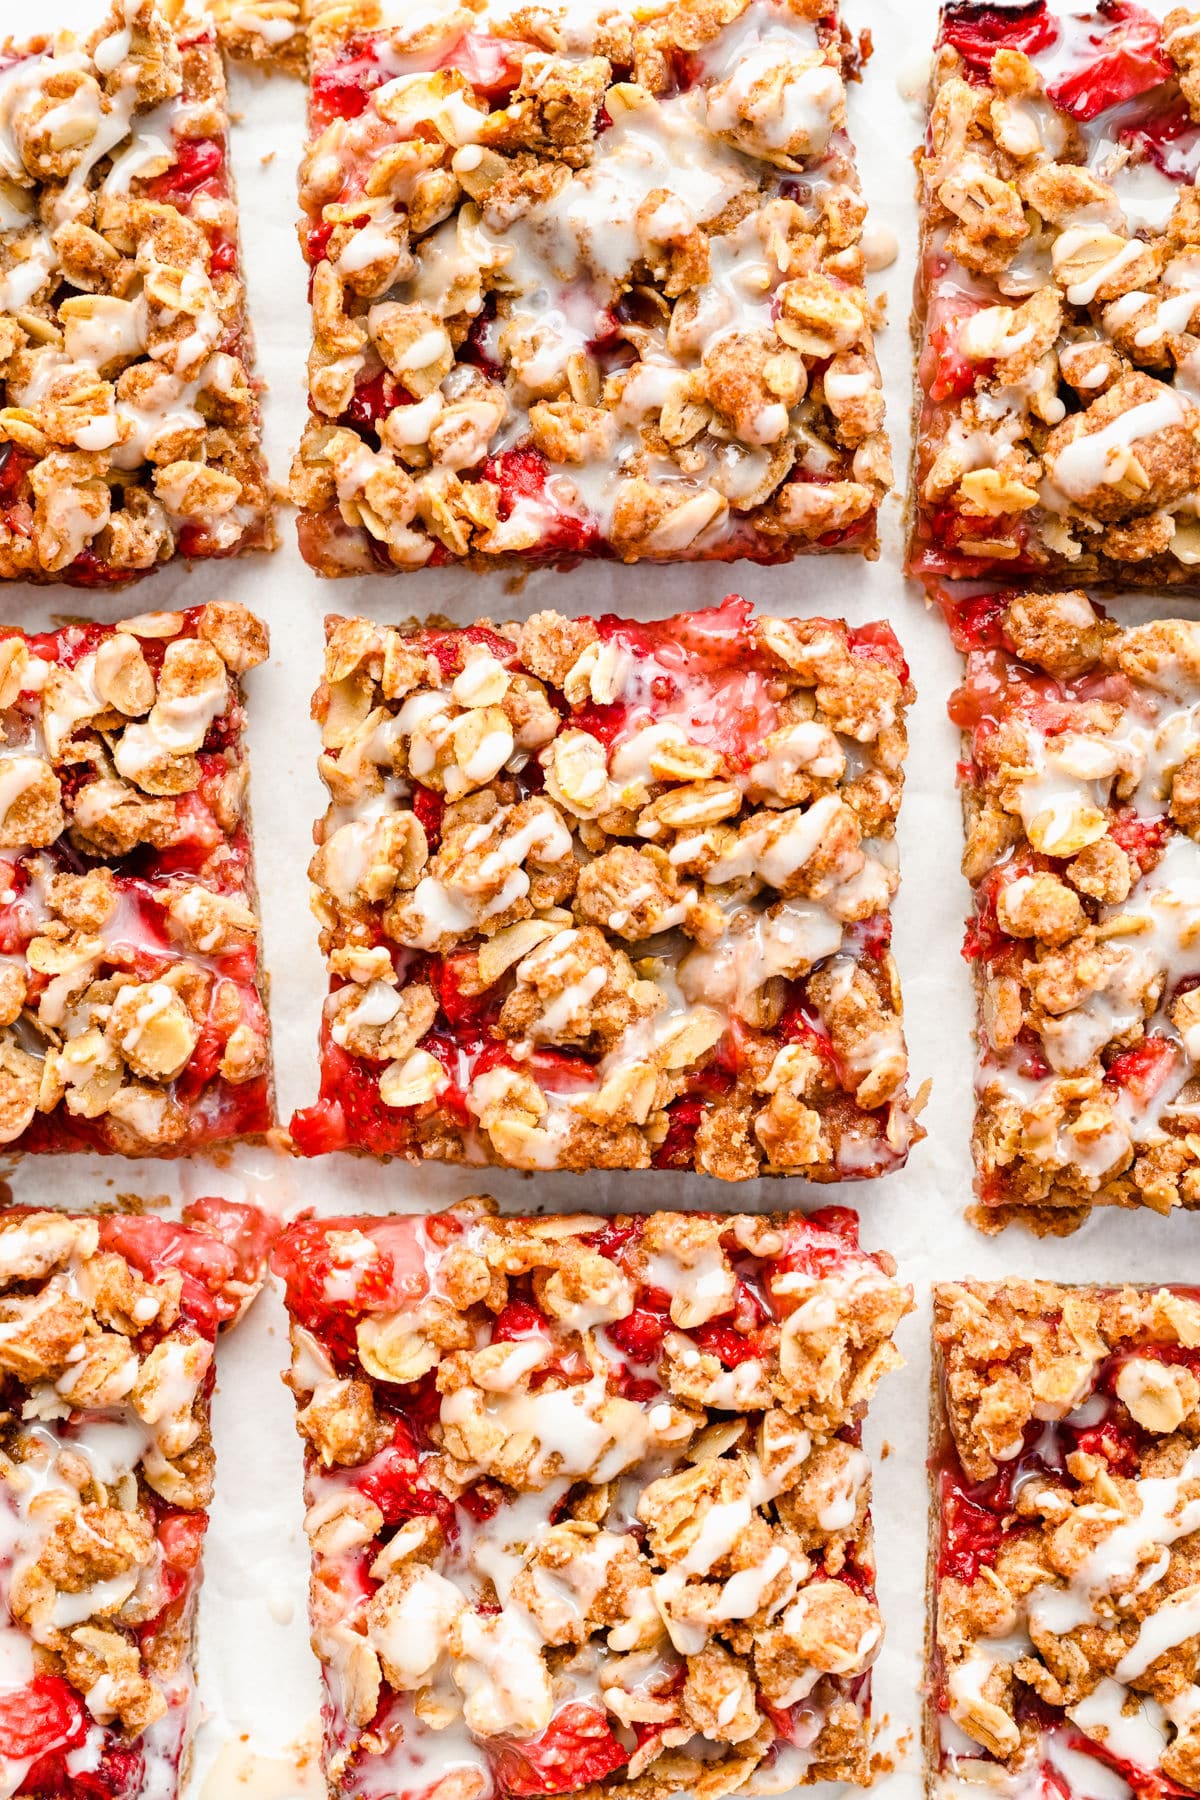 Strawberry oatmeal bars cut into pieces in rows.